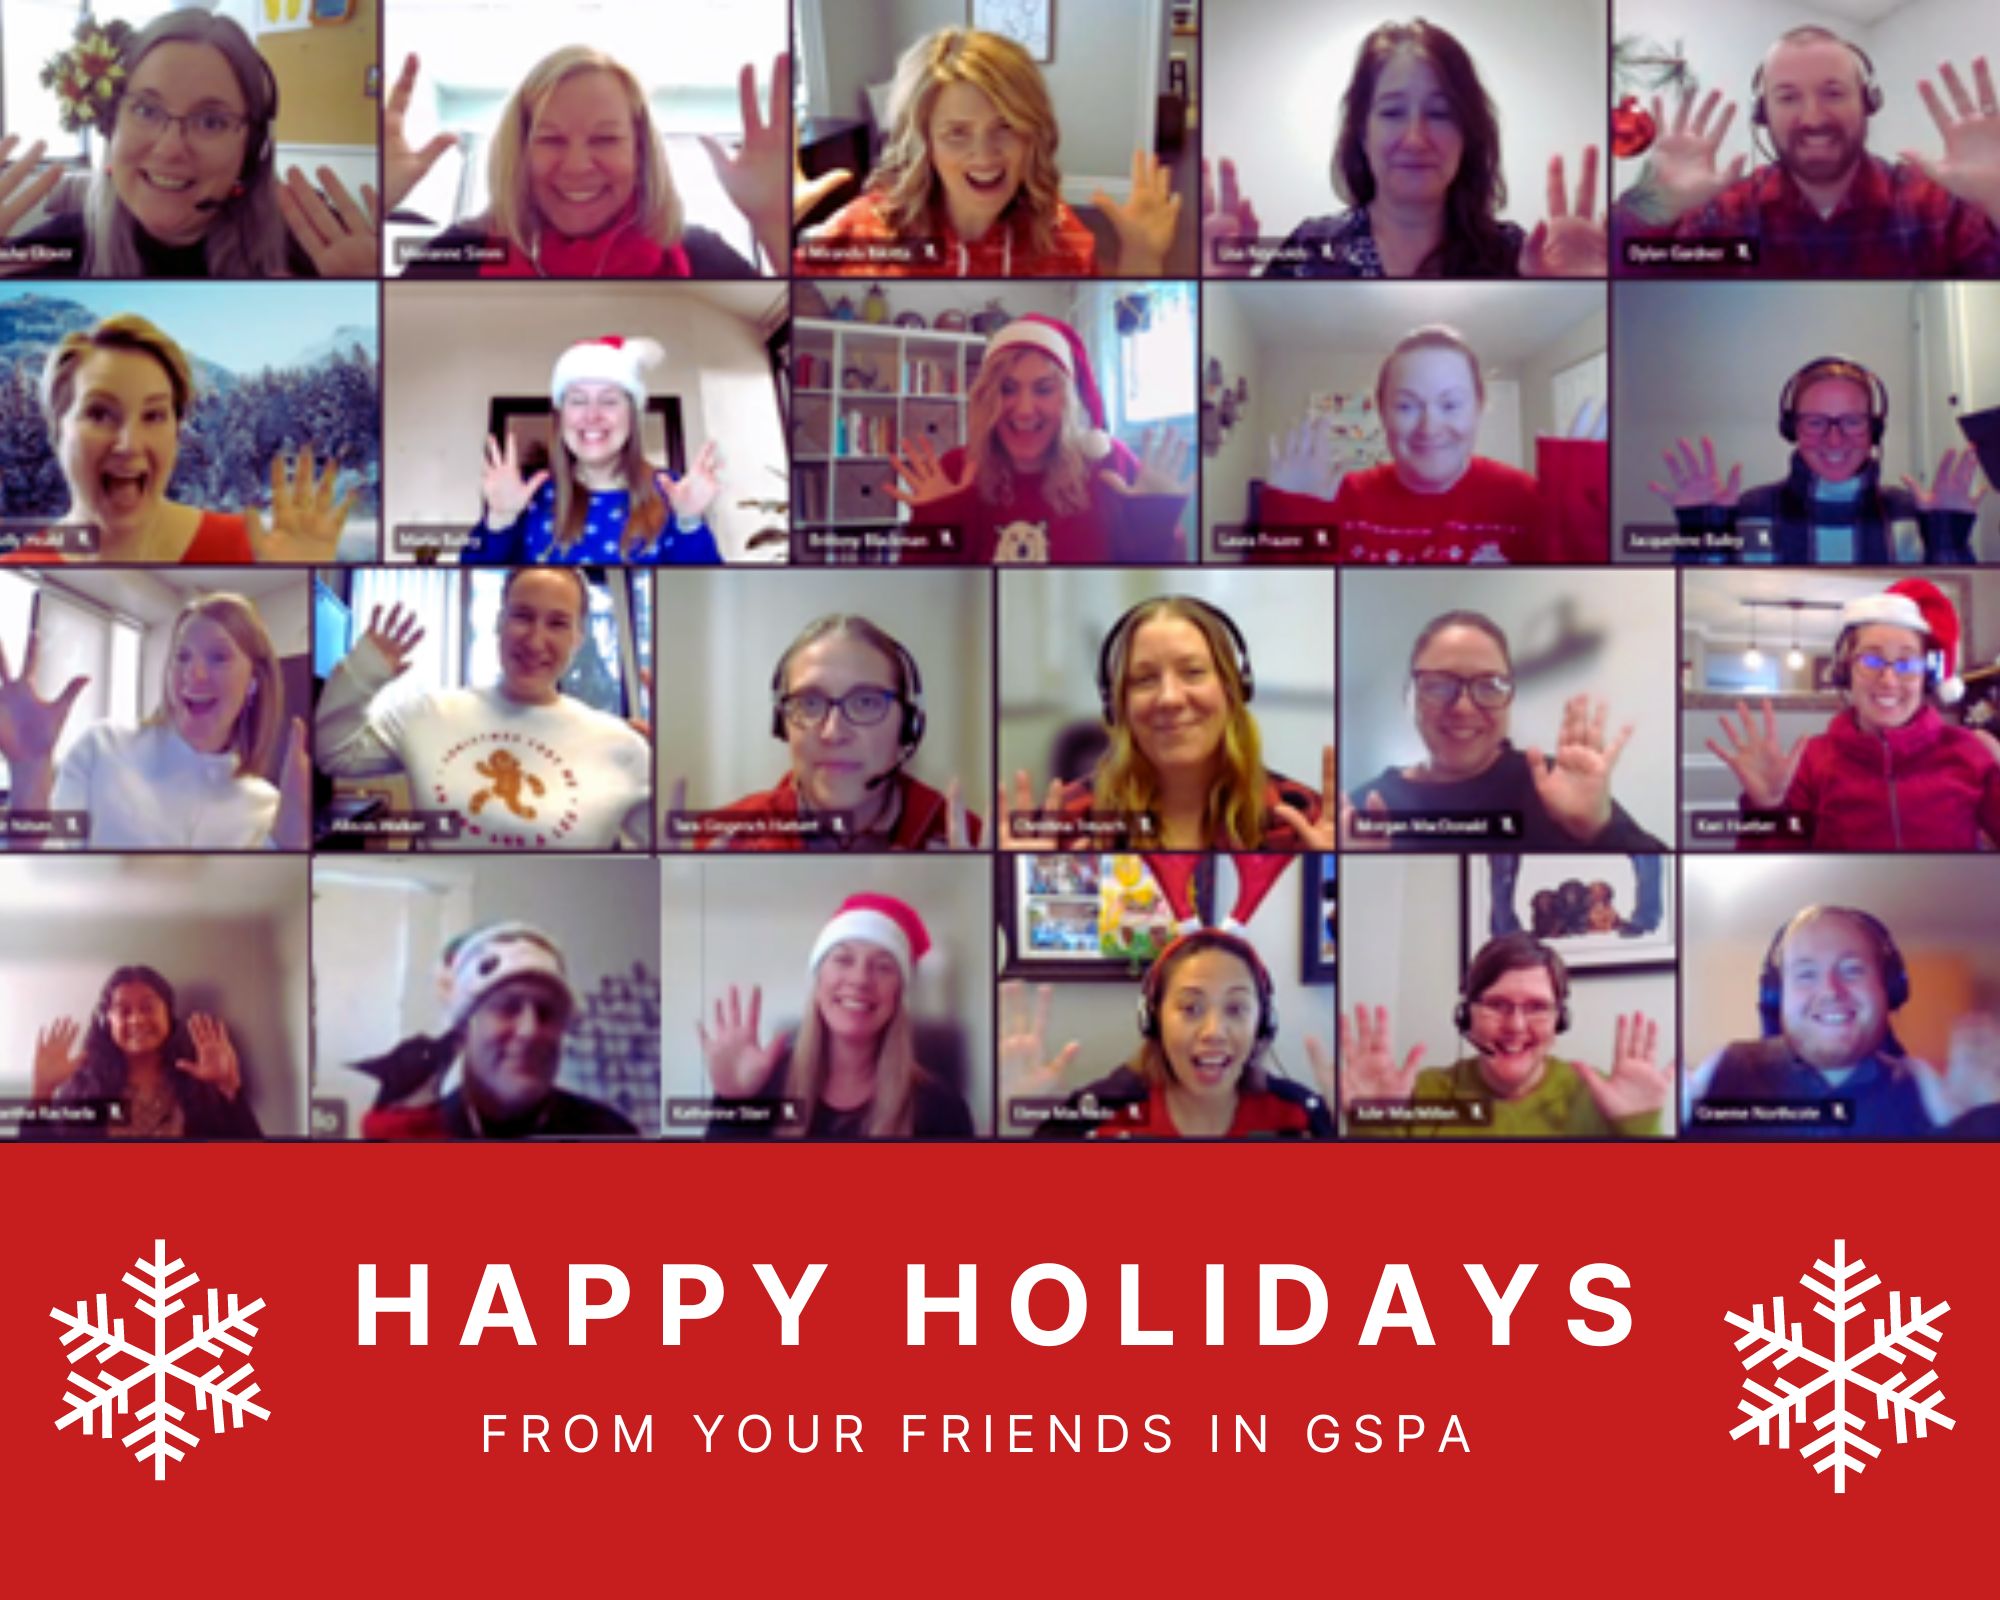 Happy holidays from GSPA picture 2022